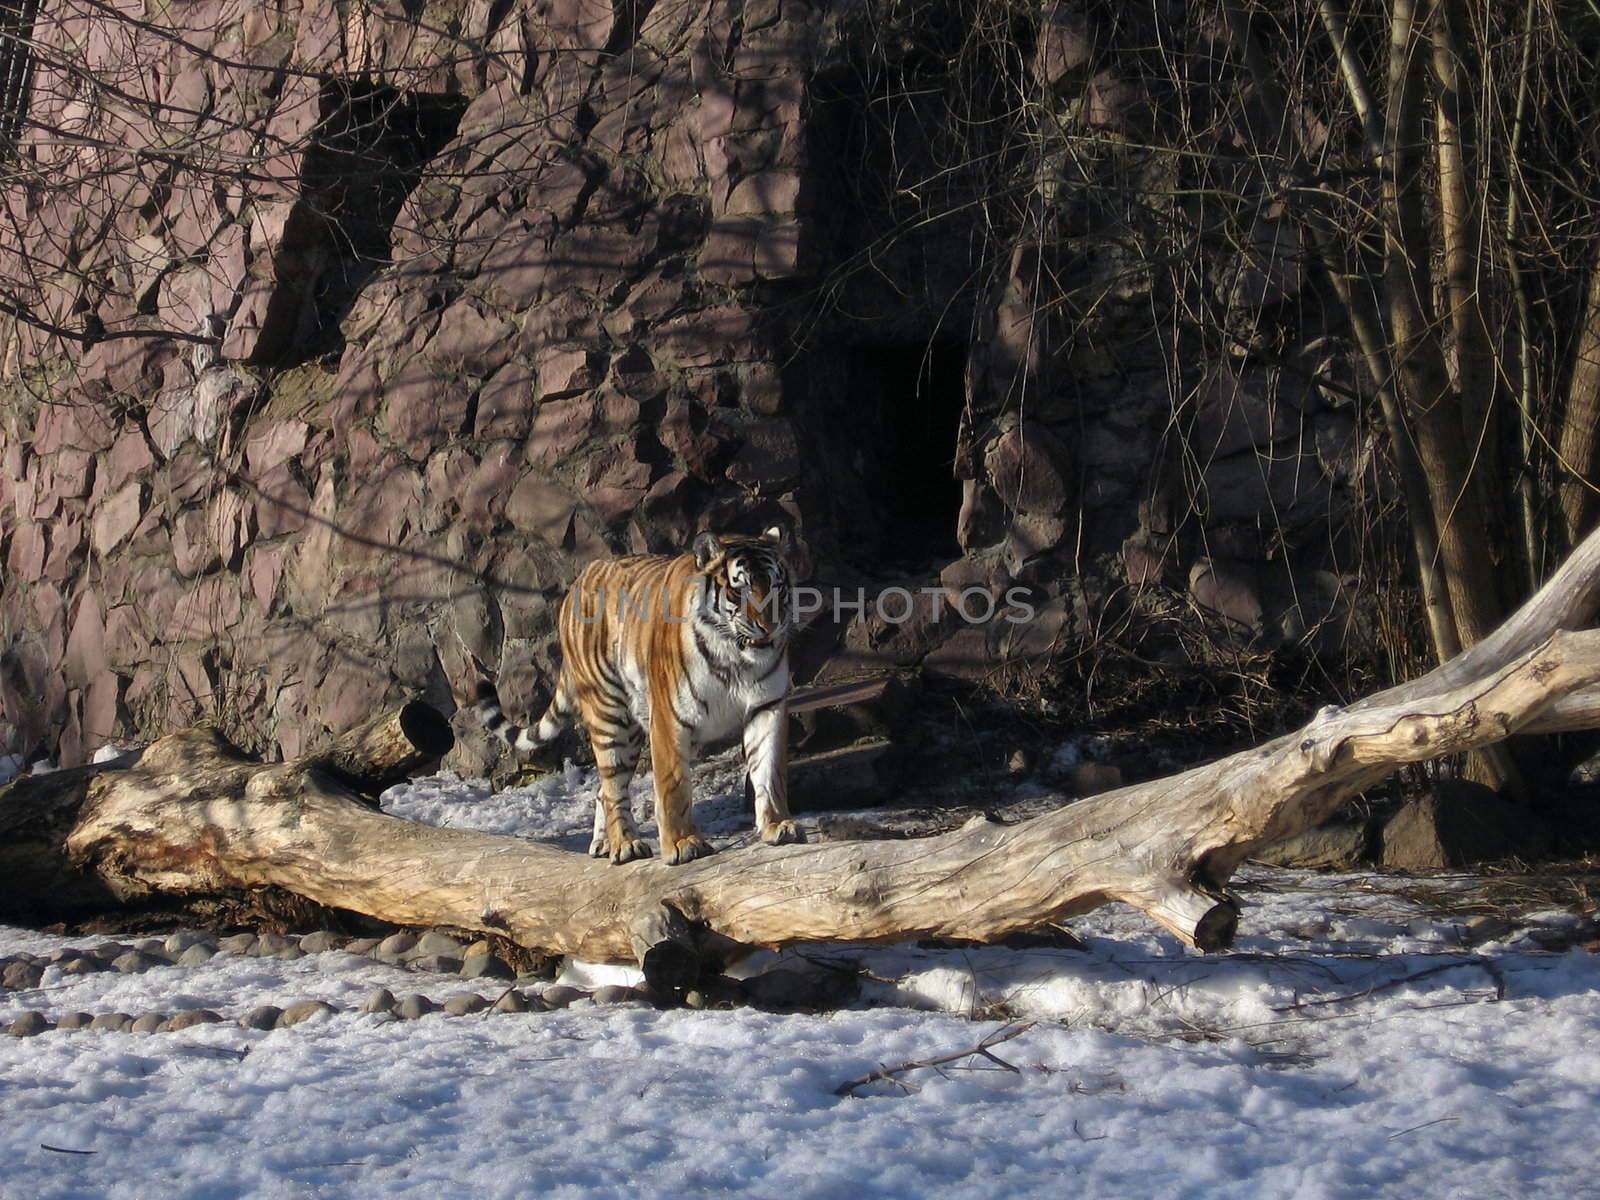 Tiger in zoo by tomatto